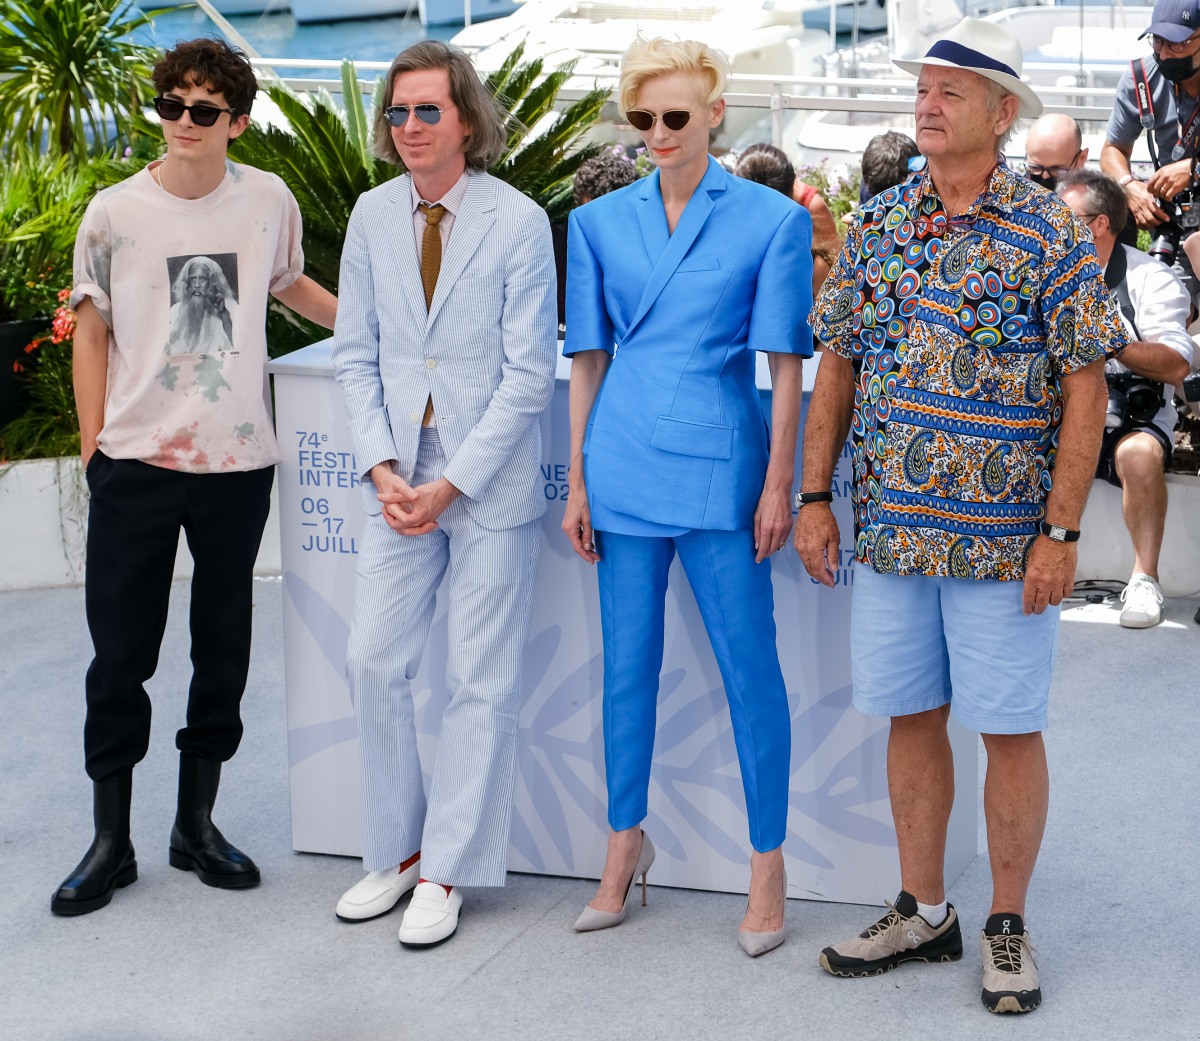 "The French Dispatch" Photocall during the 74th Cannes International Film Festival